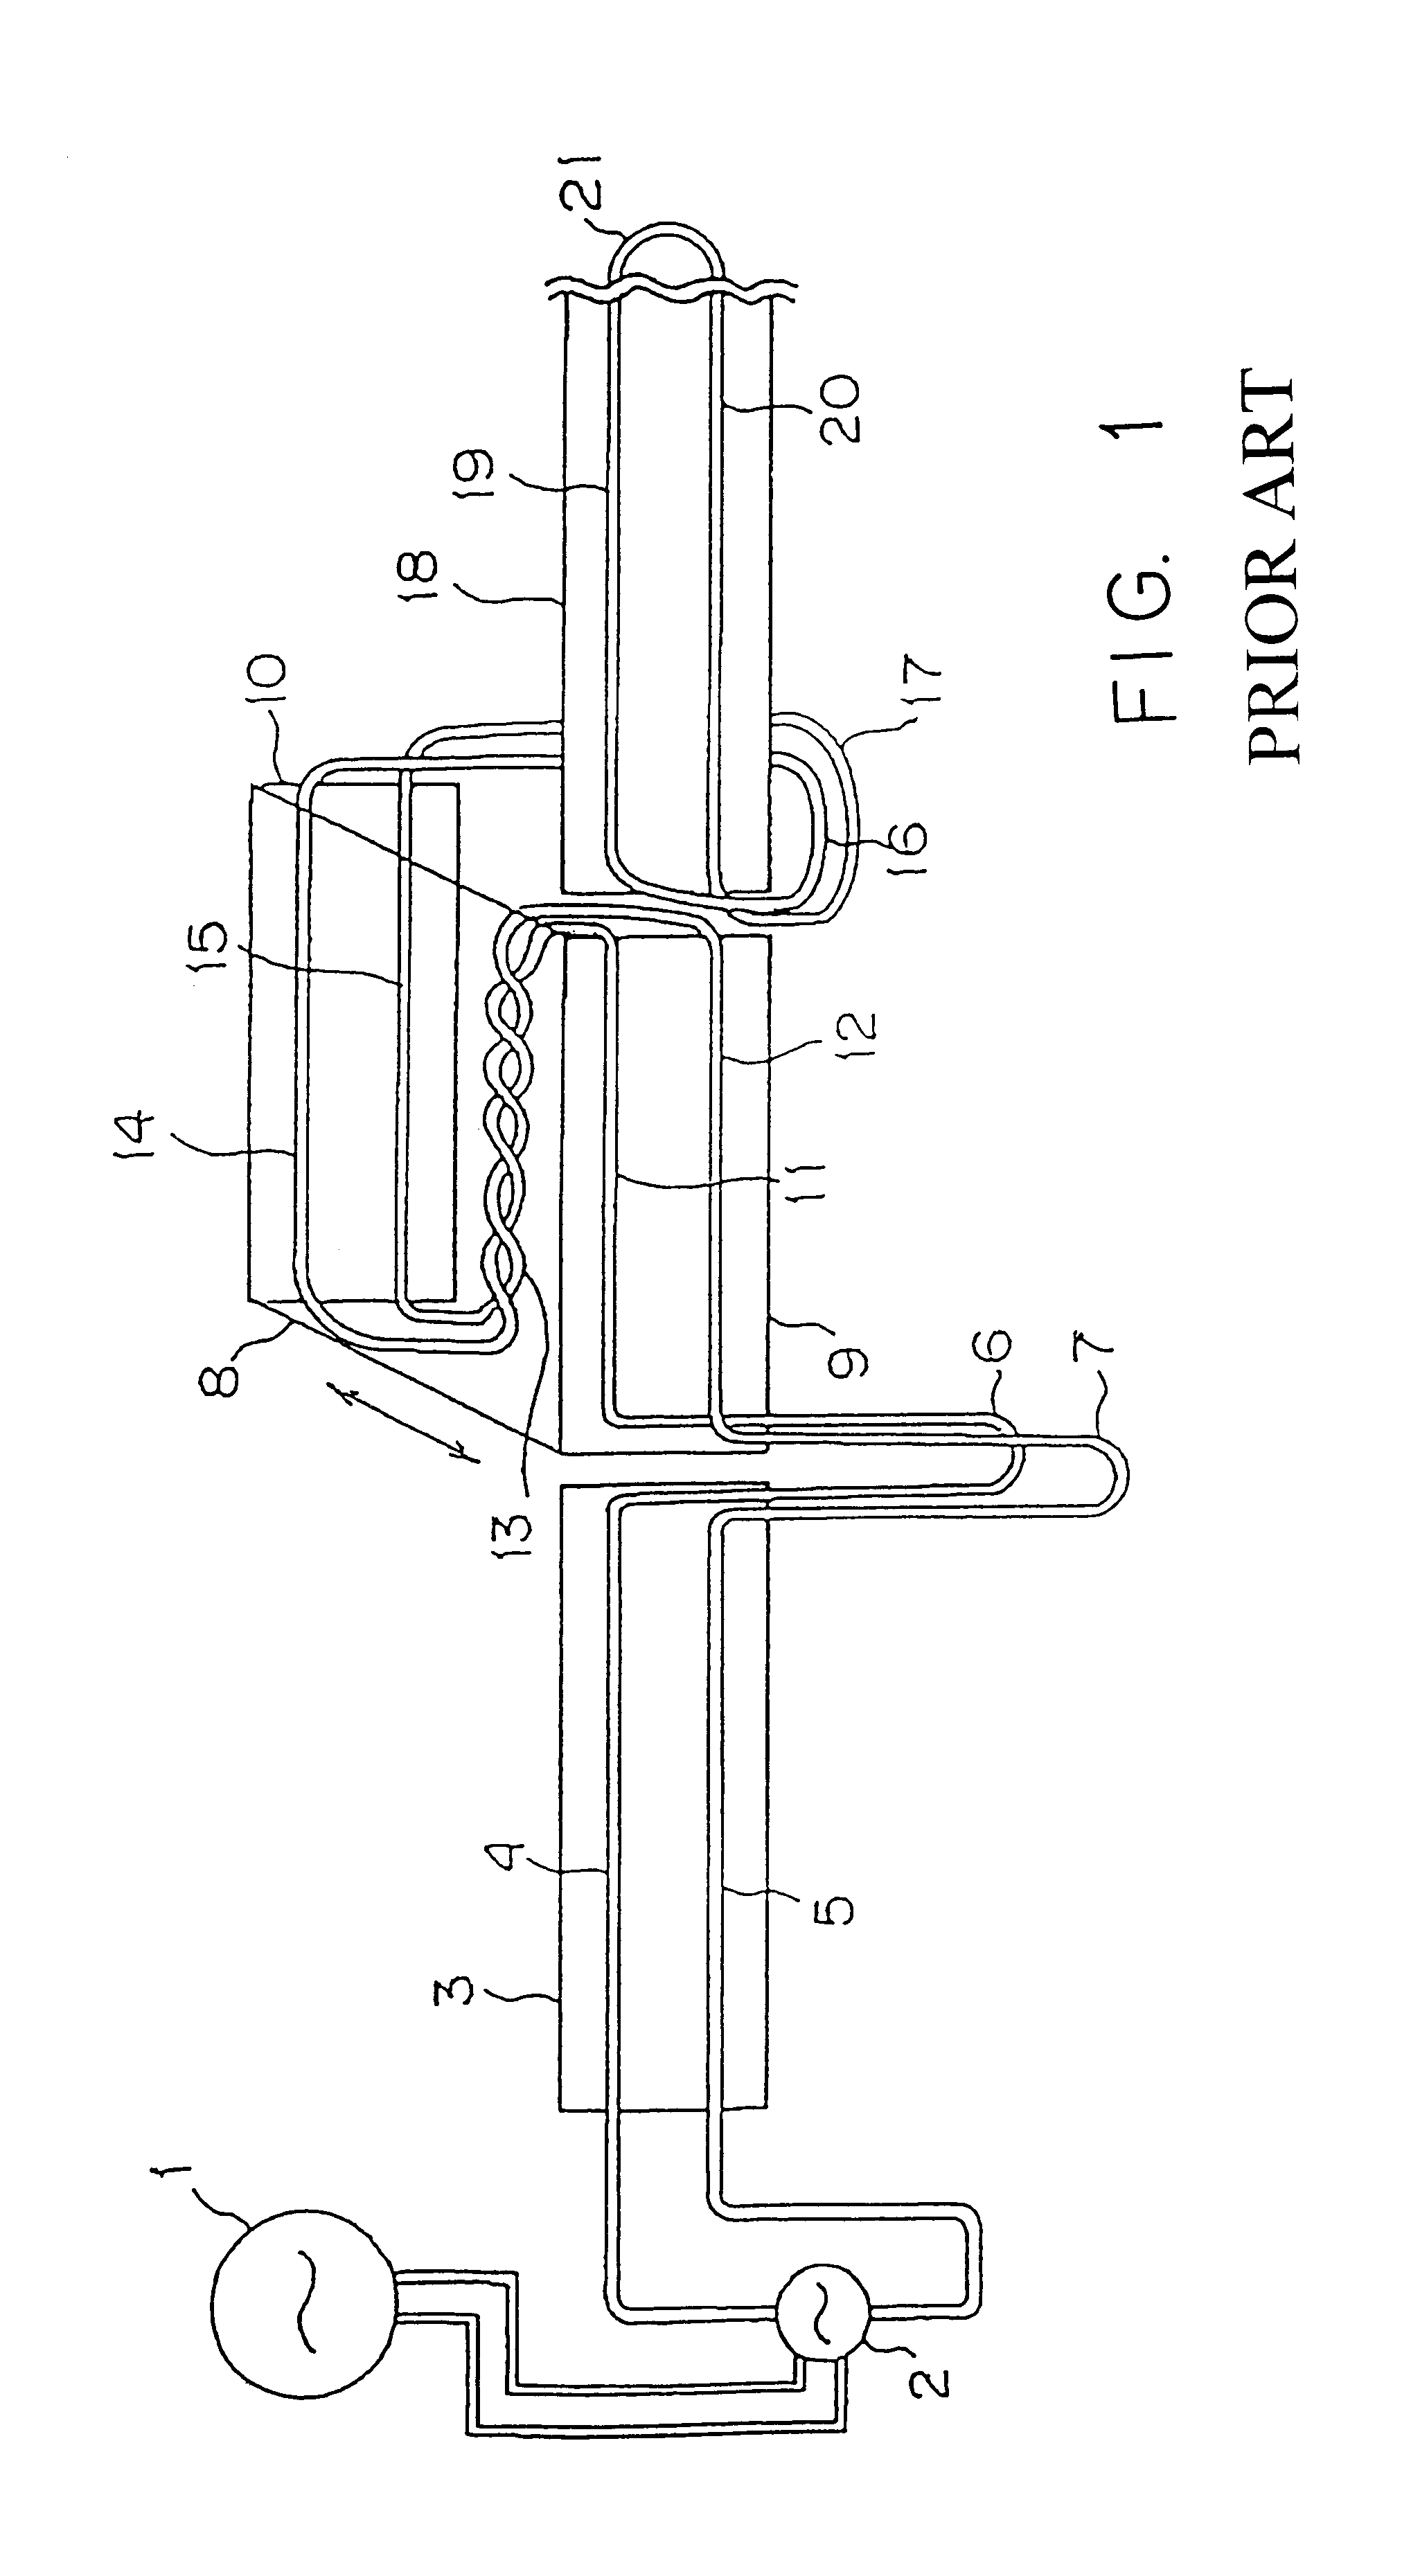 Non-contact electric power supply system for a rail-guided vehicle